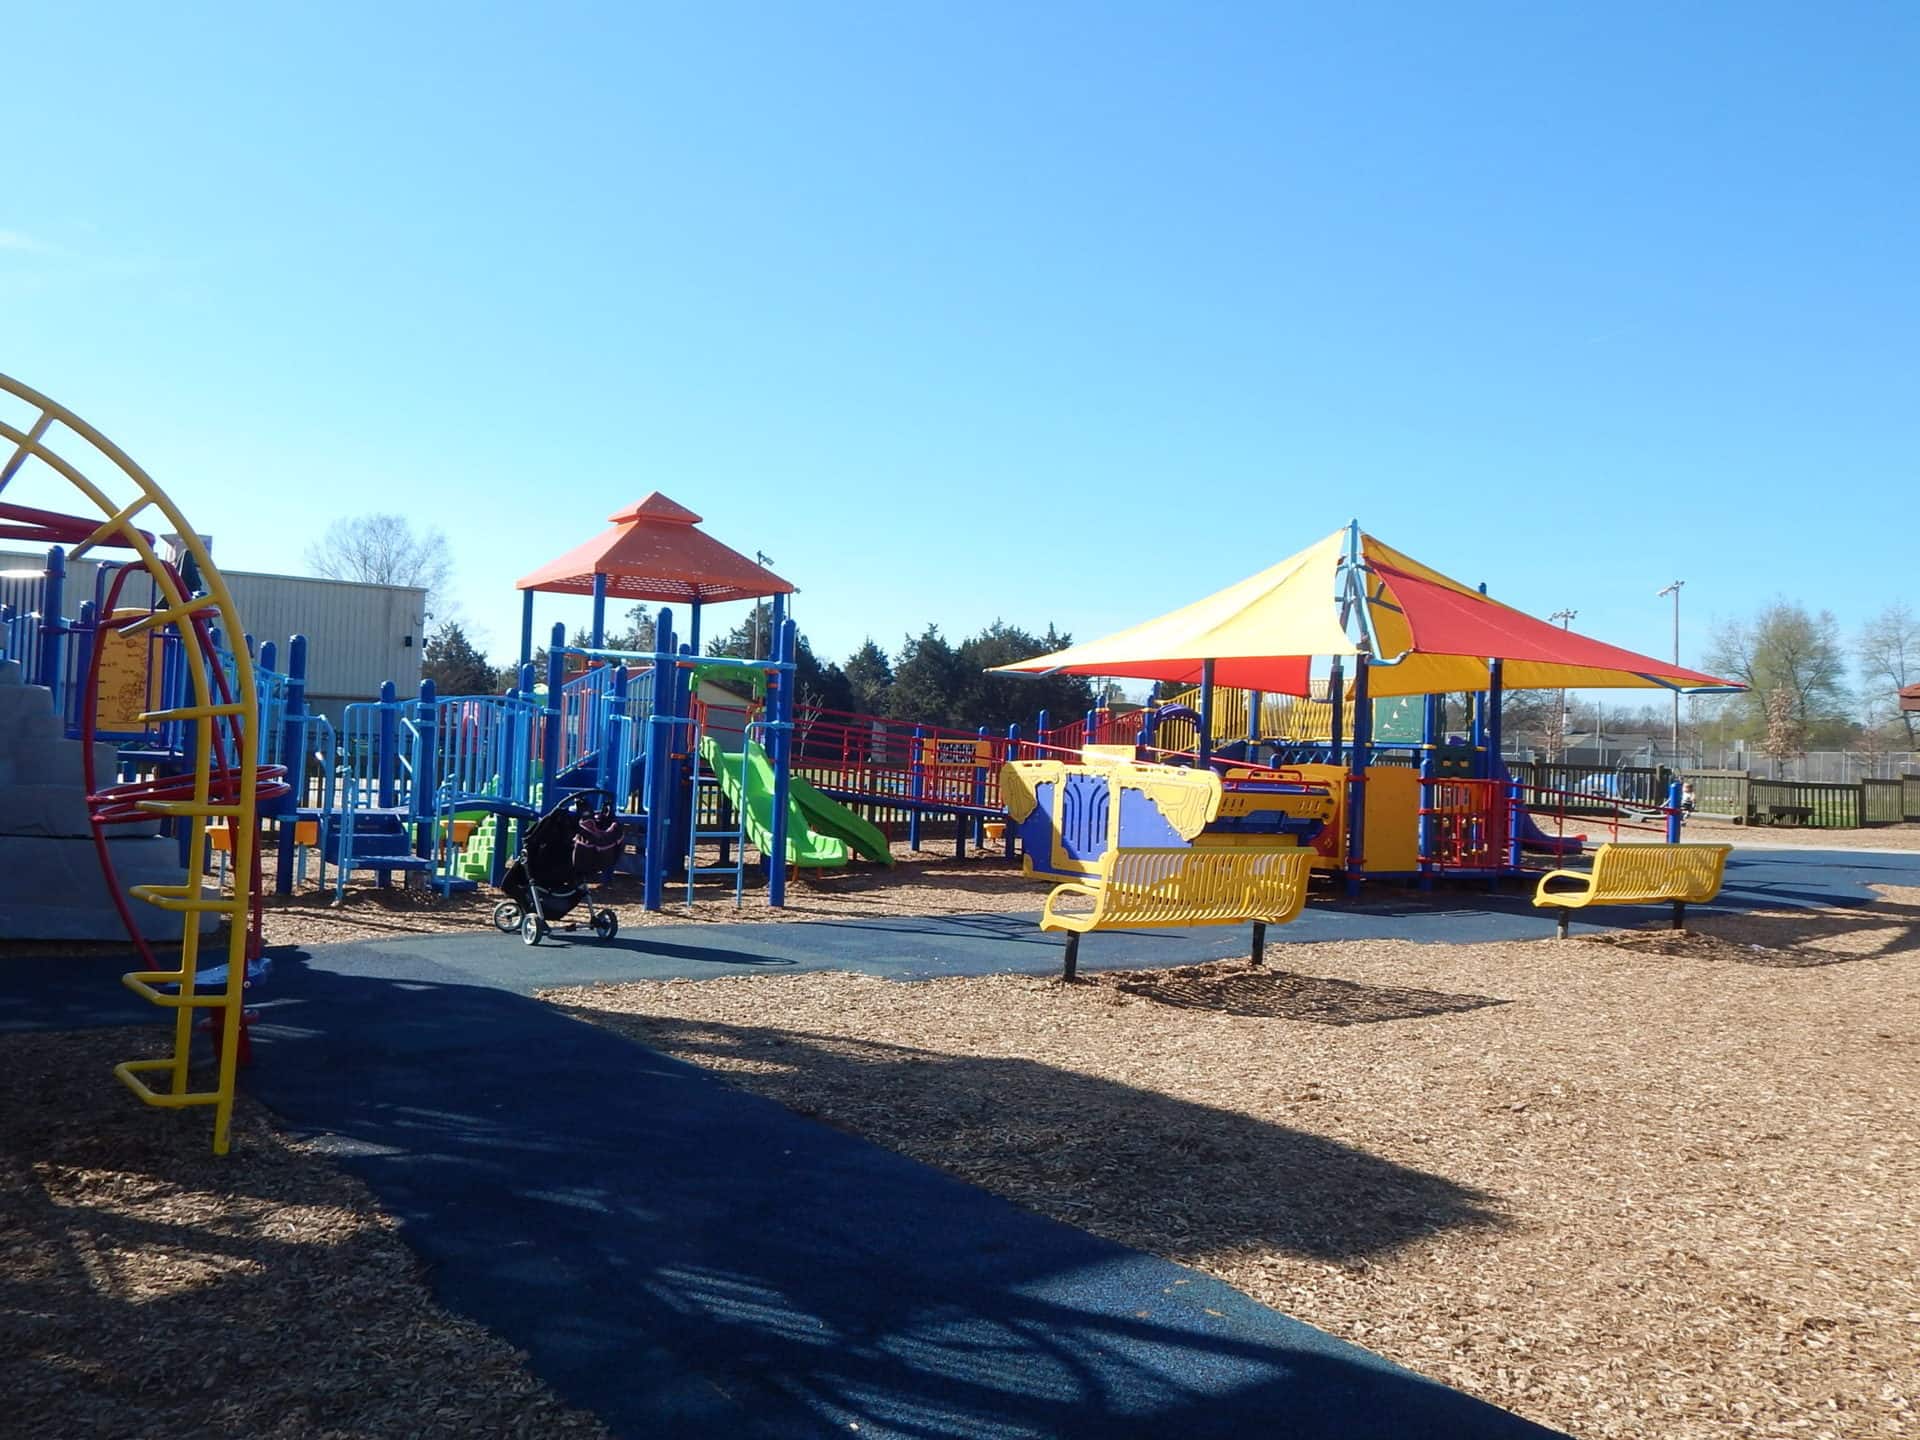 Charlie Daniels Park - Another view of Planet Playground